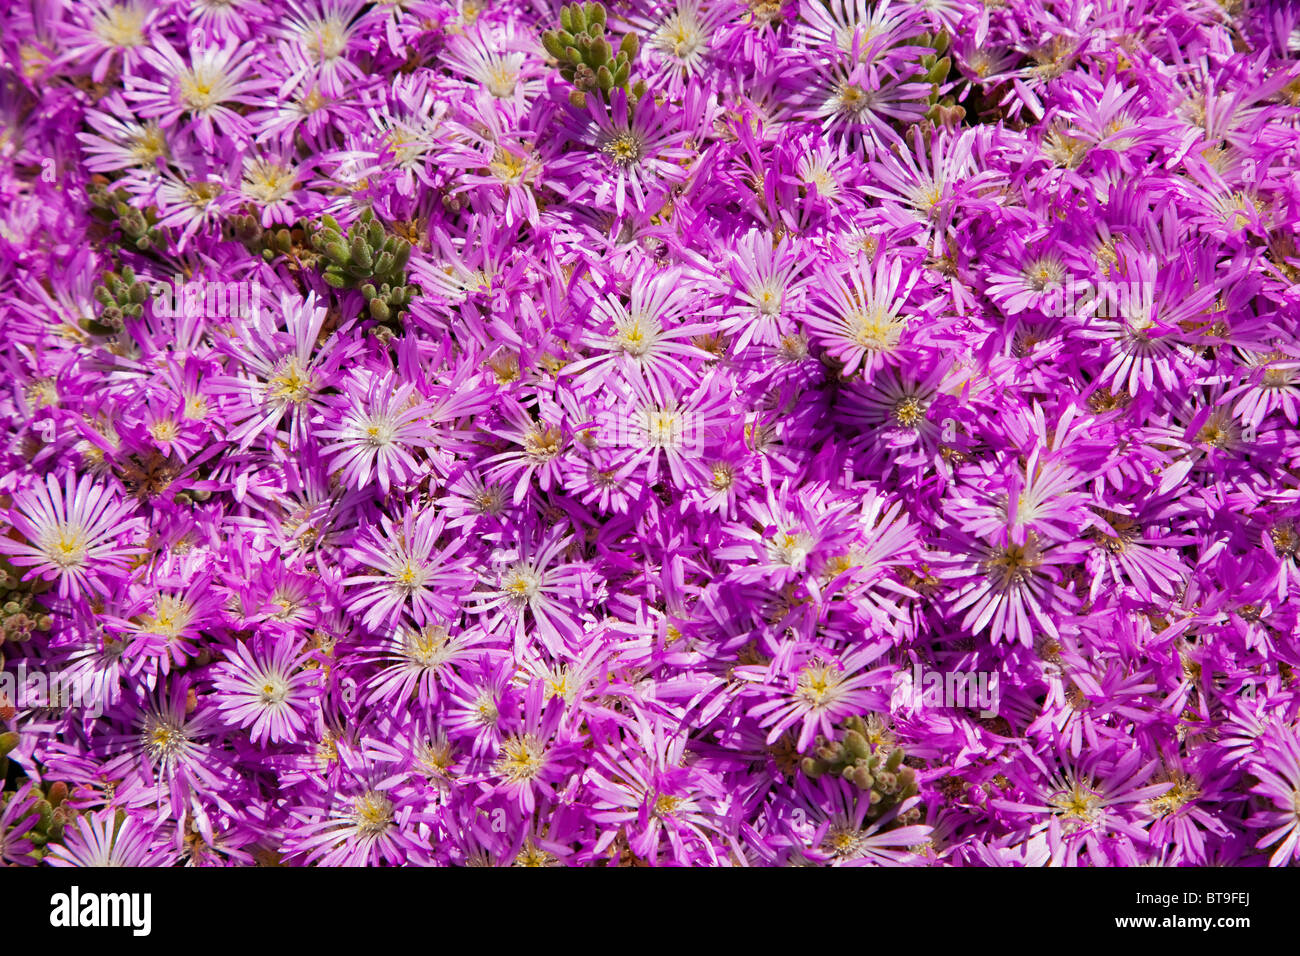 Pink and purple flowers Stock Photo